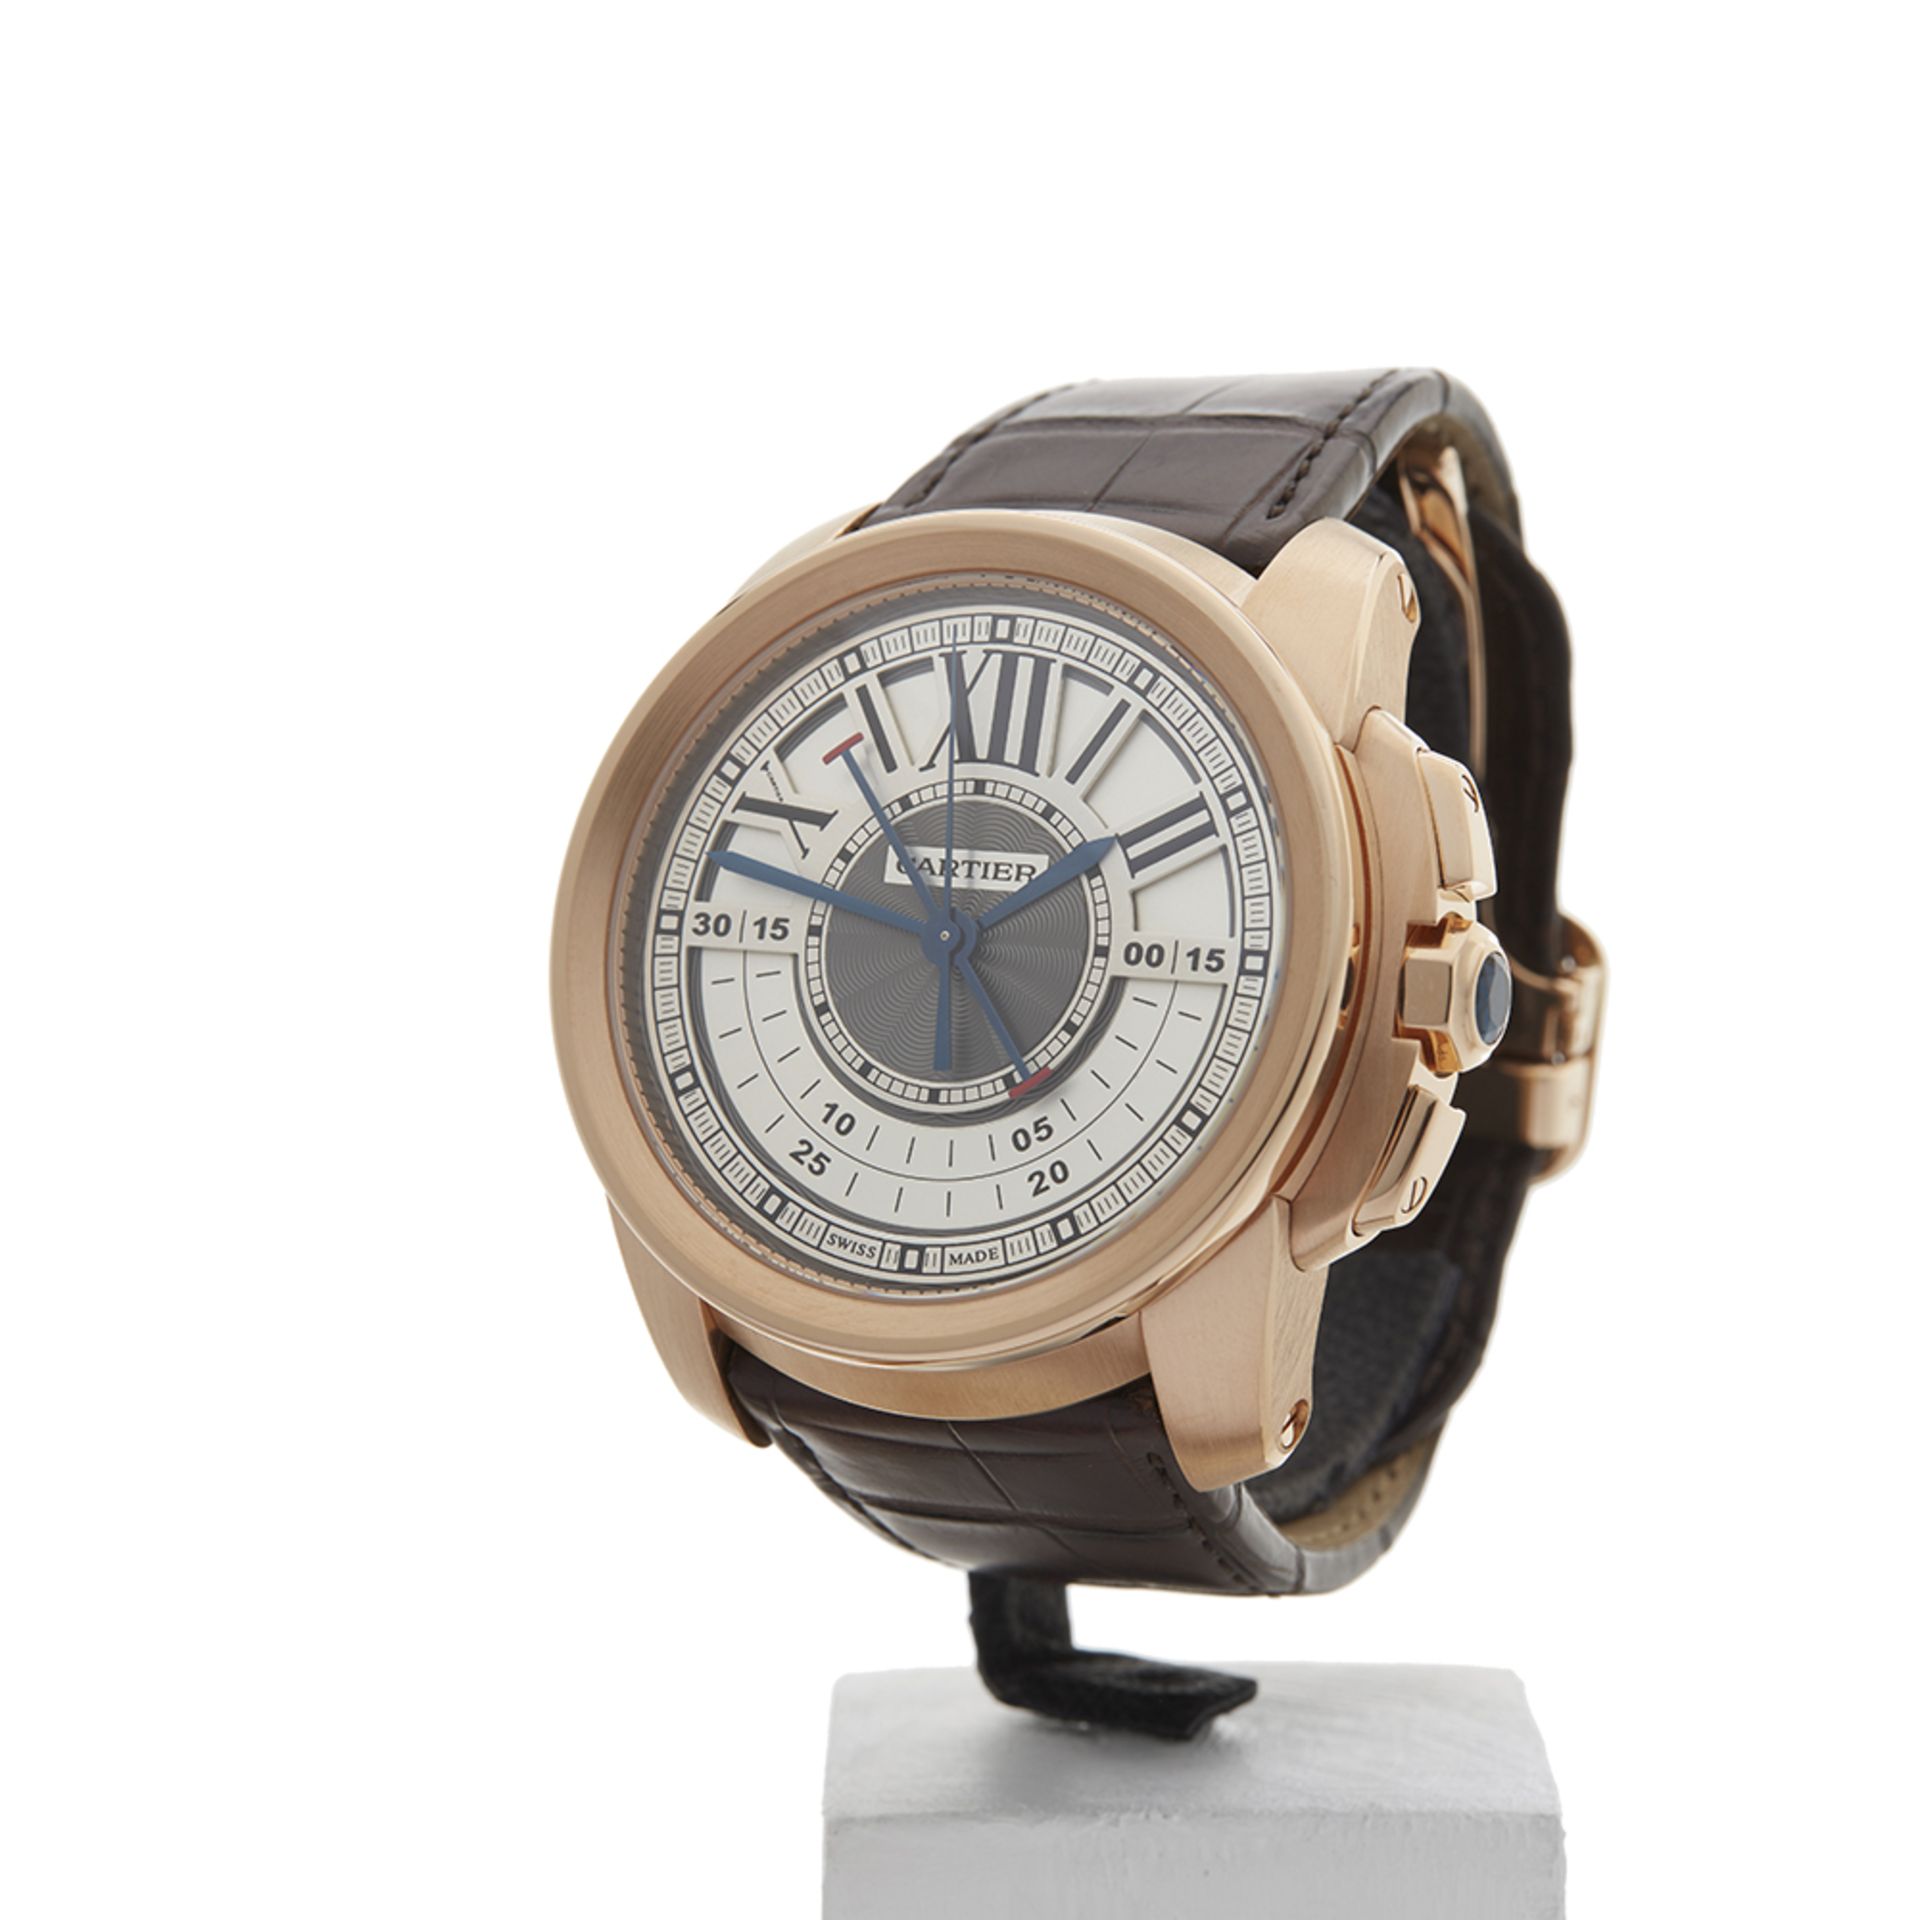 Cartier Calibre Central Chronograph 44mm 18k Rose Gold - 3242 or W7100004 - Image 3 of 10